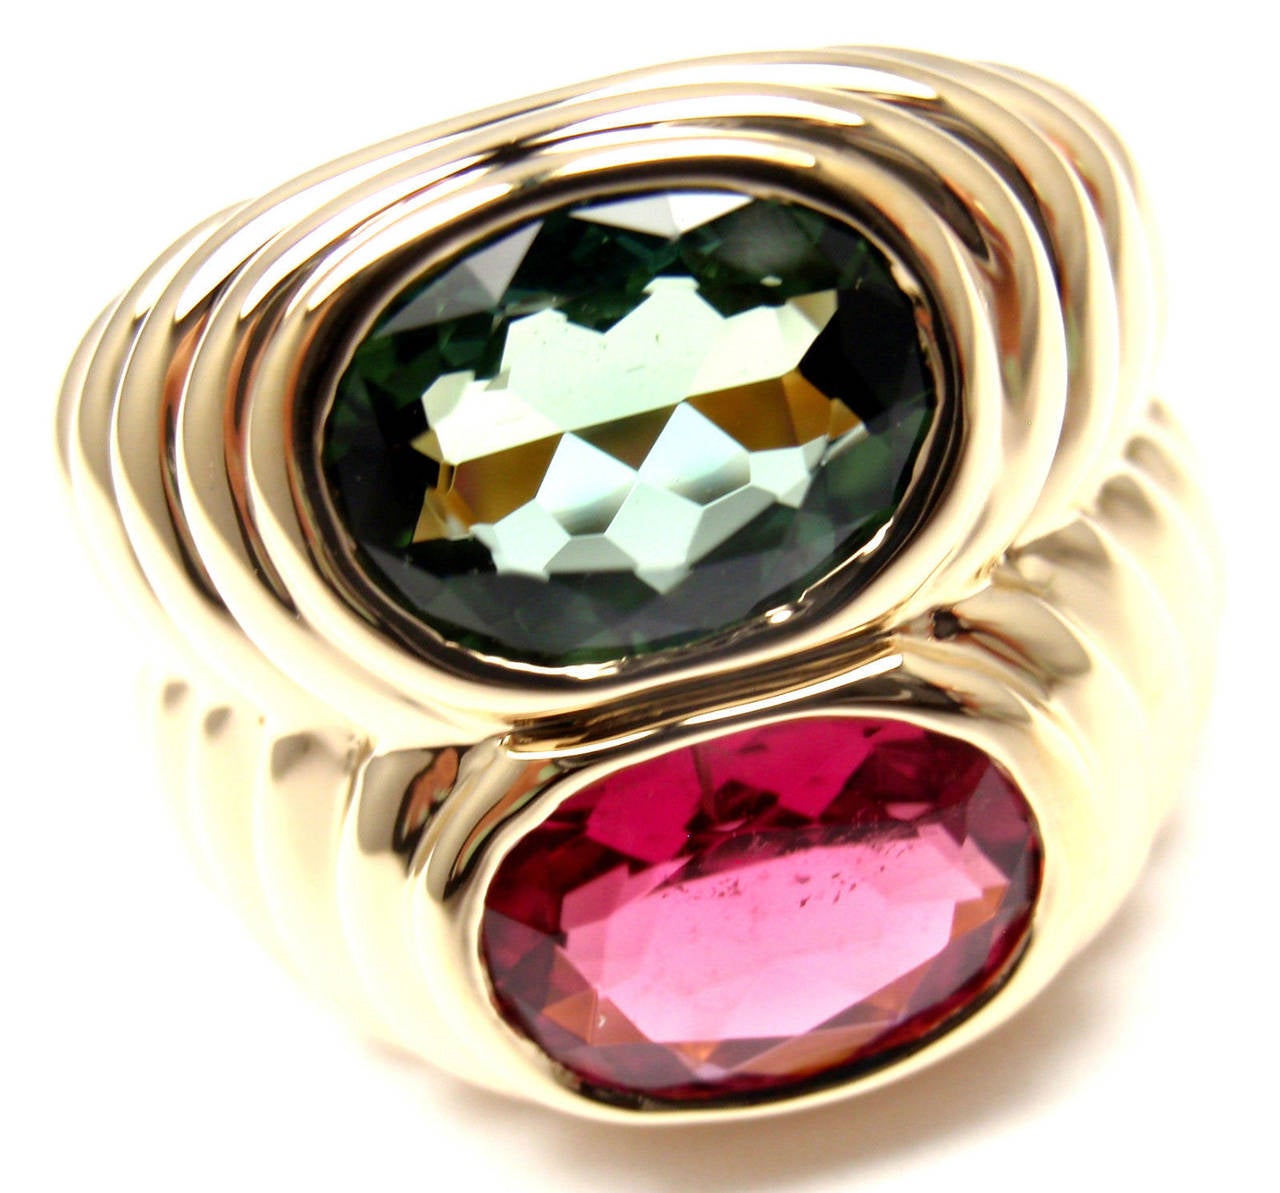 18k Yellow Gold Pink And Green Tourmaline Ring By Bulgari.
With 1 oval pink tourmaline 9mm x 7mm
1 oval green tourmaline  9mm x 7mm

Details:
Ring Size: 6 (resize available)
Width: 16mm
Weight: 14.3 grams
Stamped Hallmarks: Bvlgari